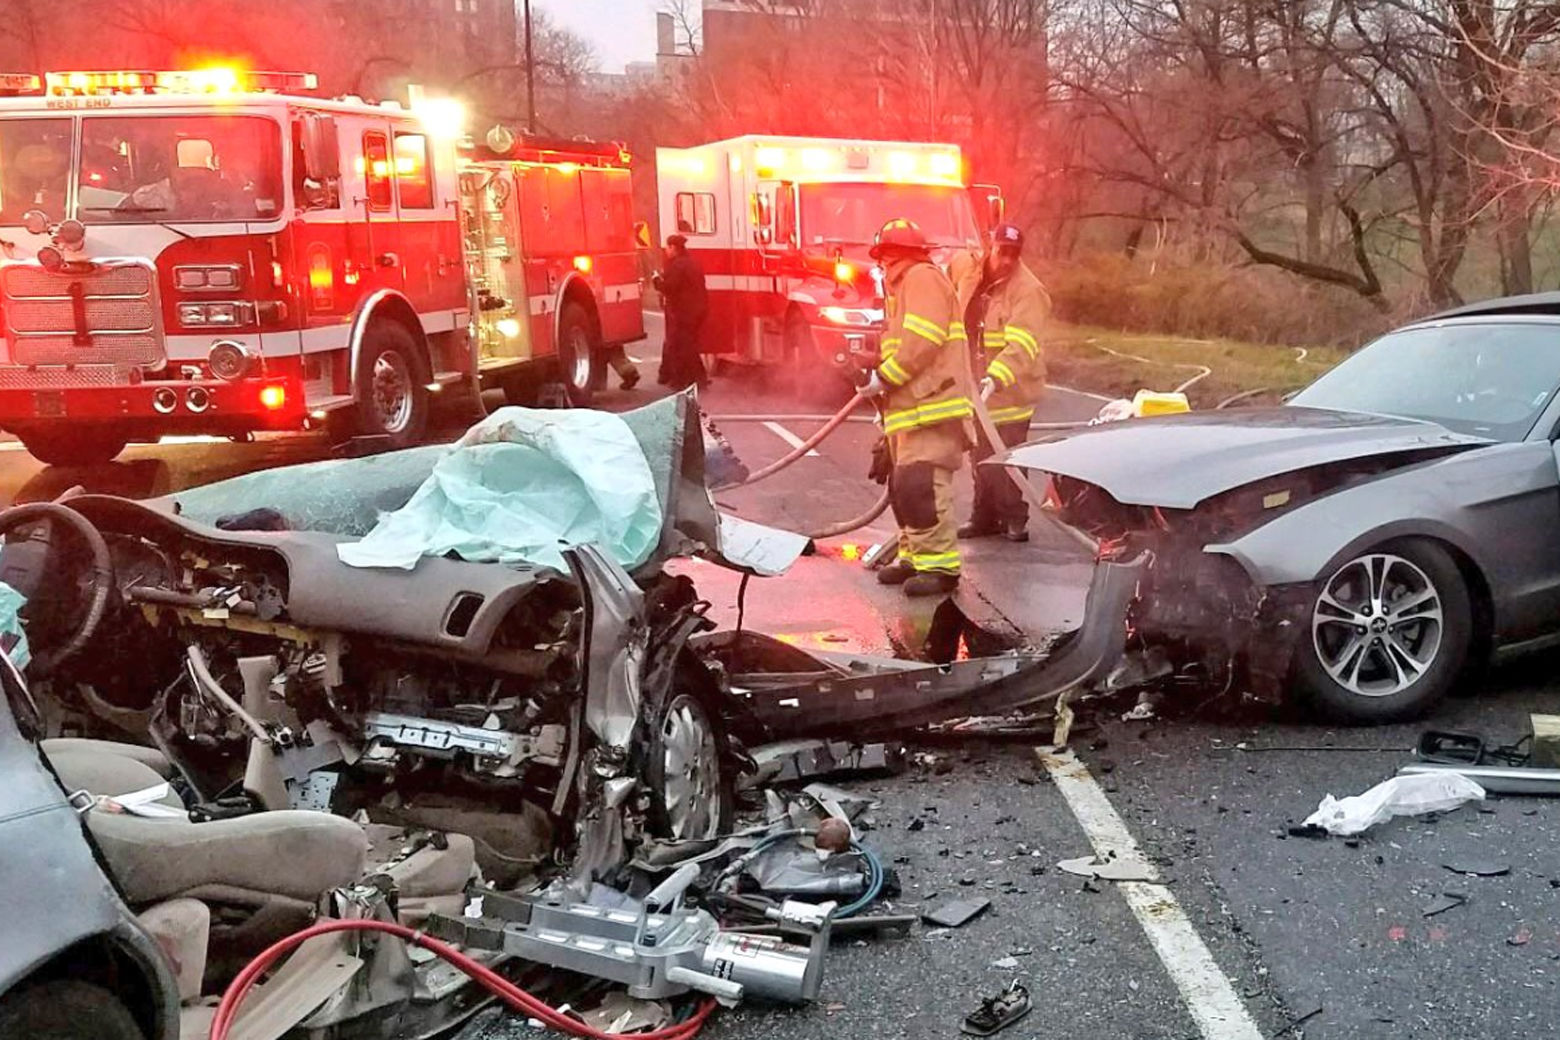 A serious crash on Rock Creek Parkway Thursday morning sent four people to the hospital. (Courtesy Courtesy D.C. Fire and EMS)